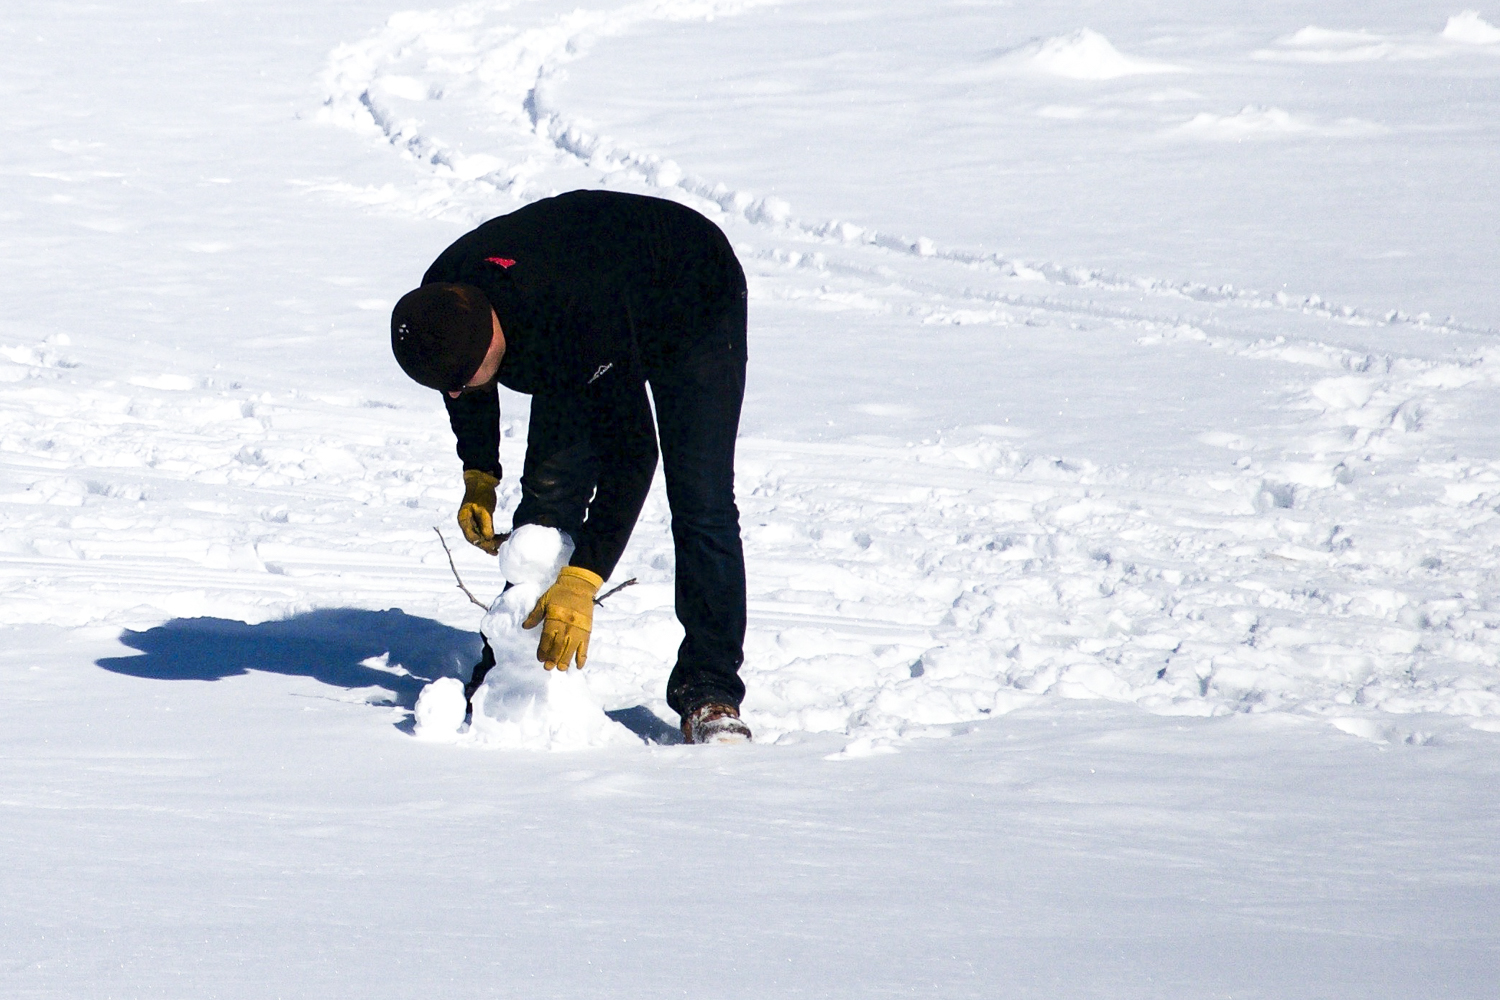 Want to give ice fishing a try this winter? Here are some tips